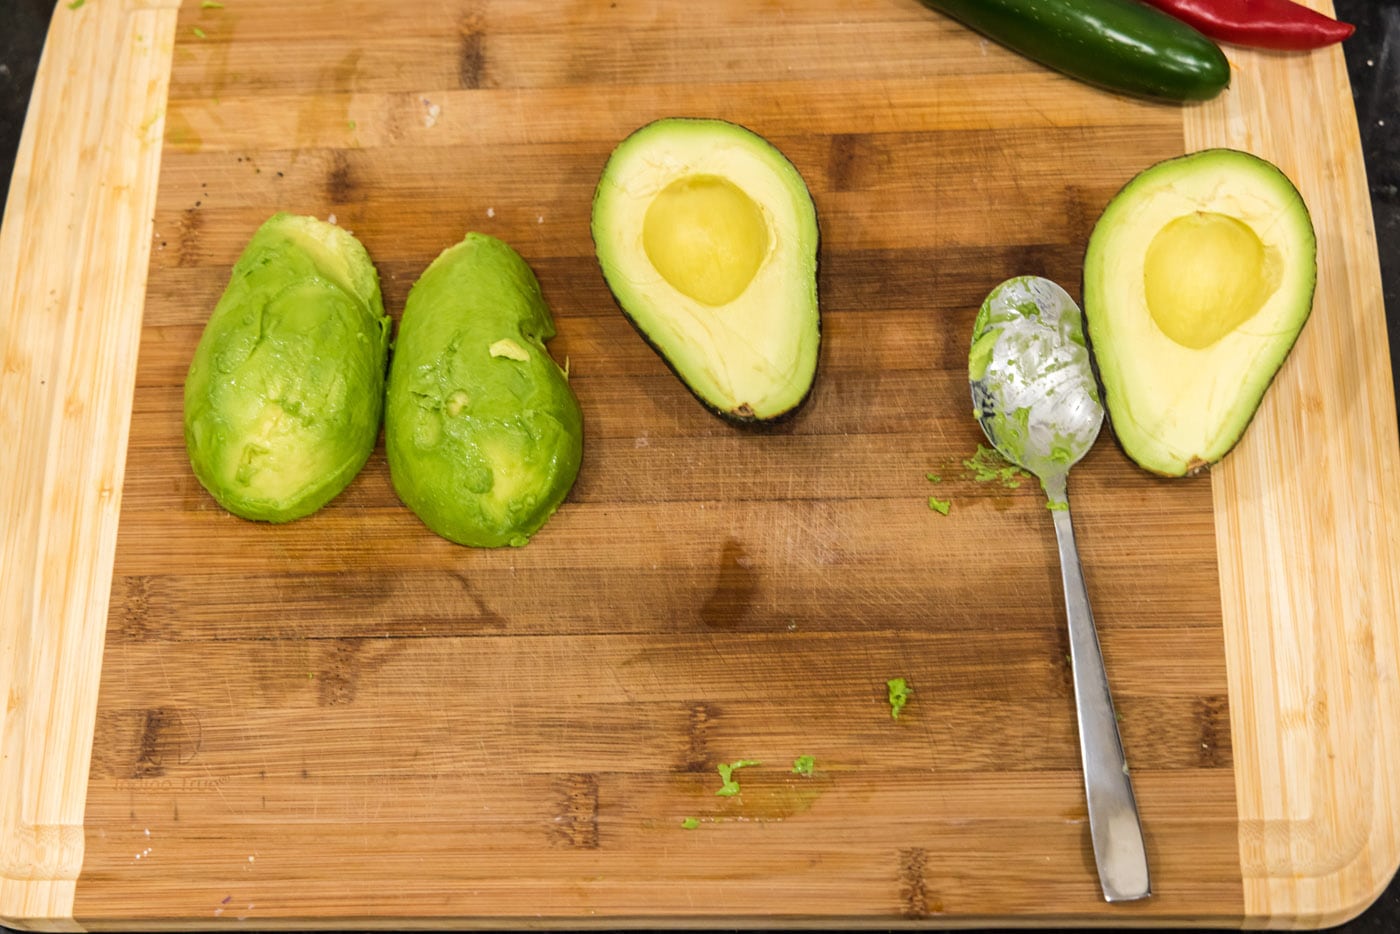 skinning avocados on a cutting board with a spoon